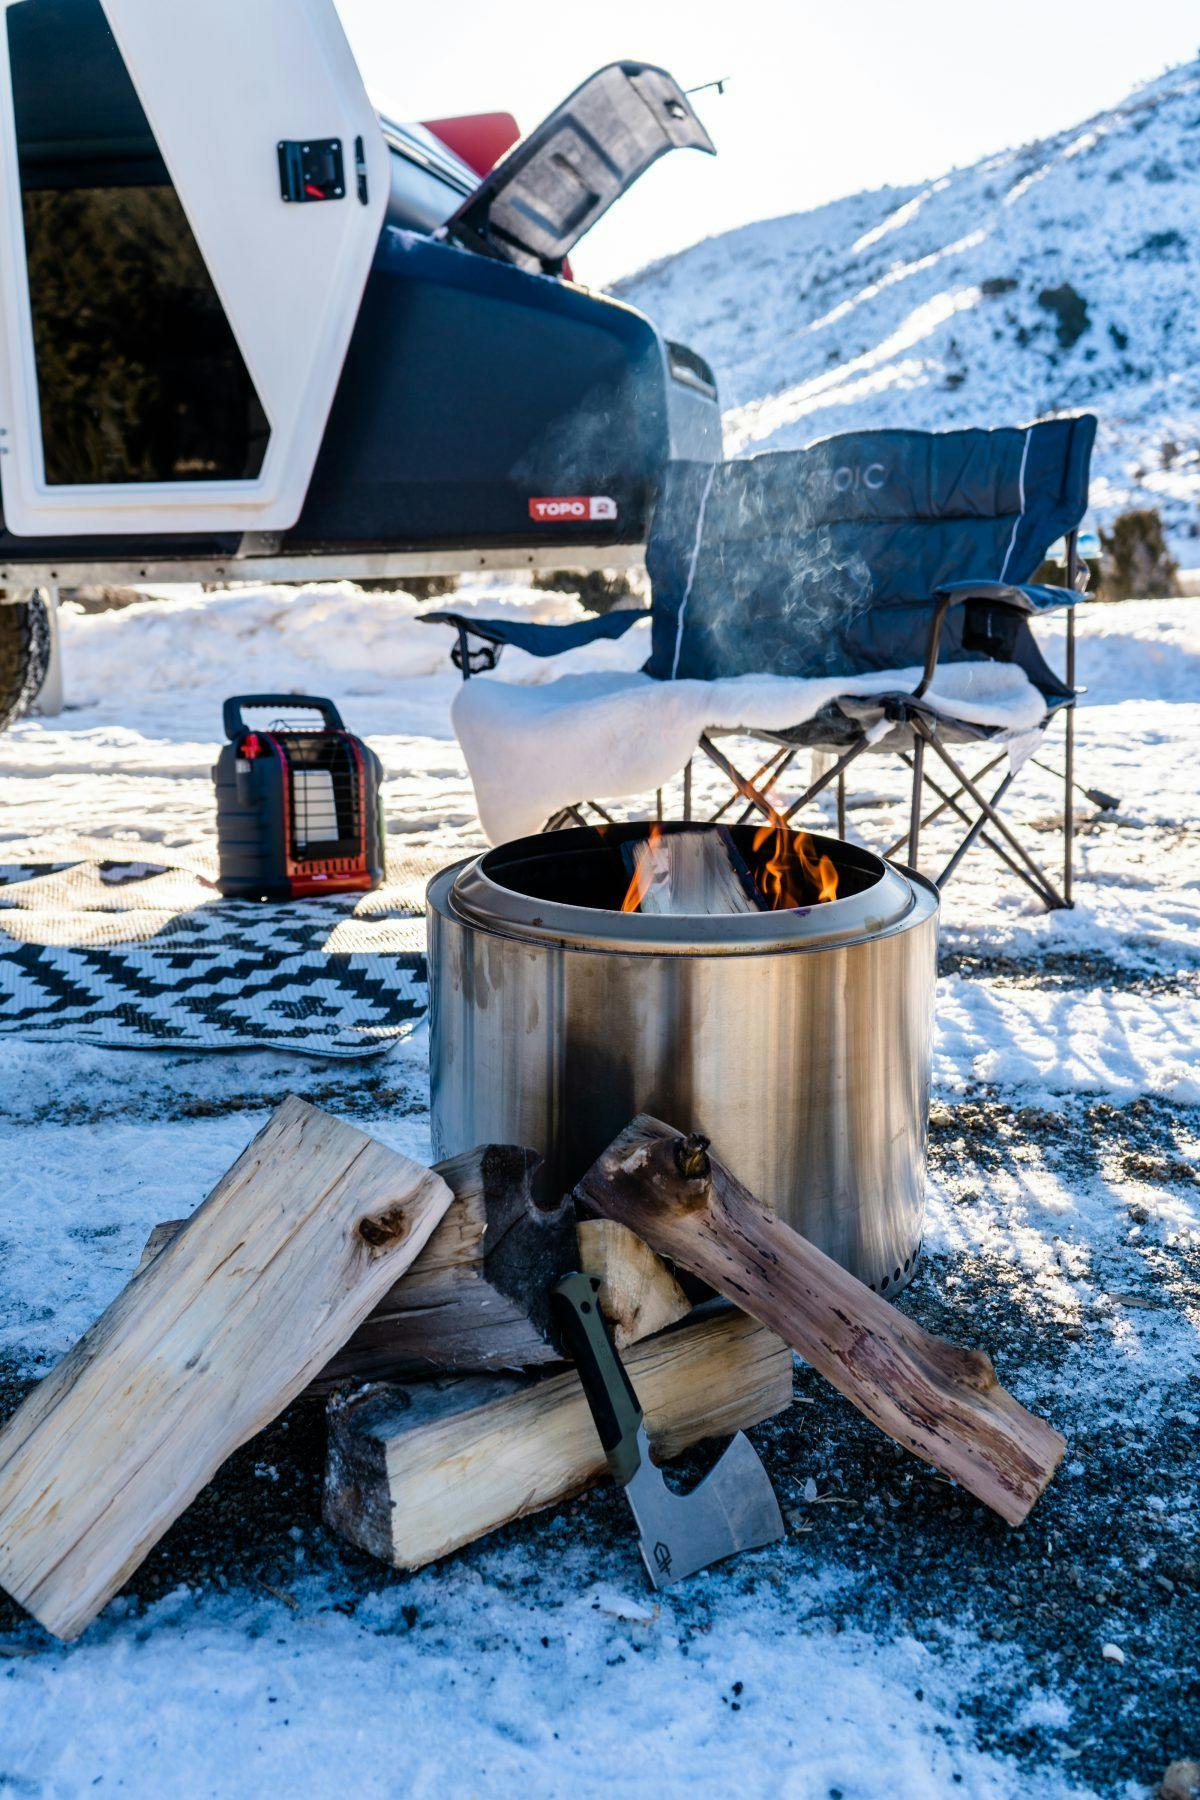 A SOLO stove set up at camp near a teardrop trailer in a winter wonderland.